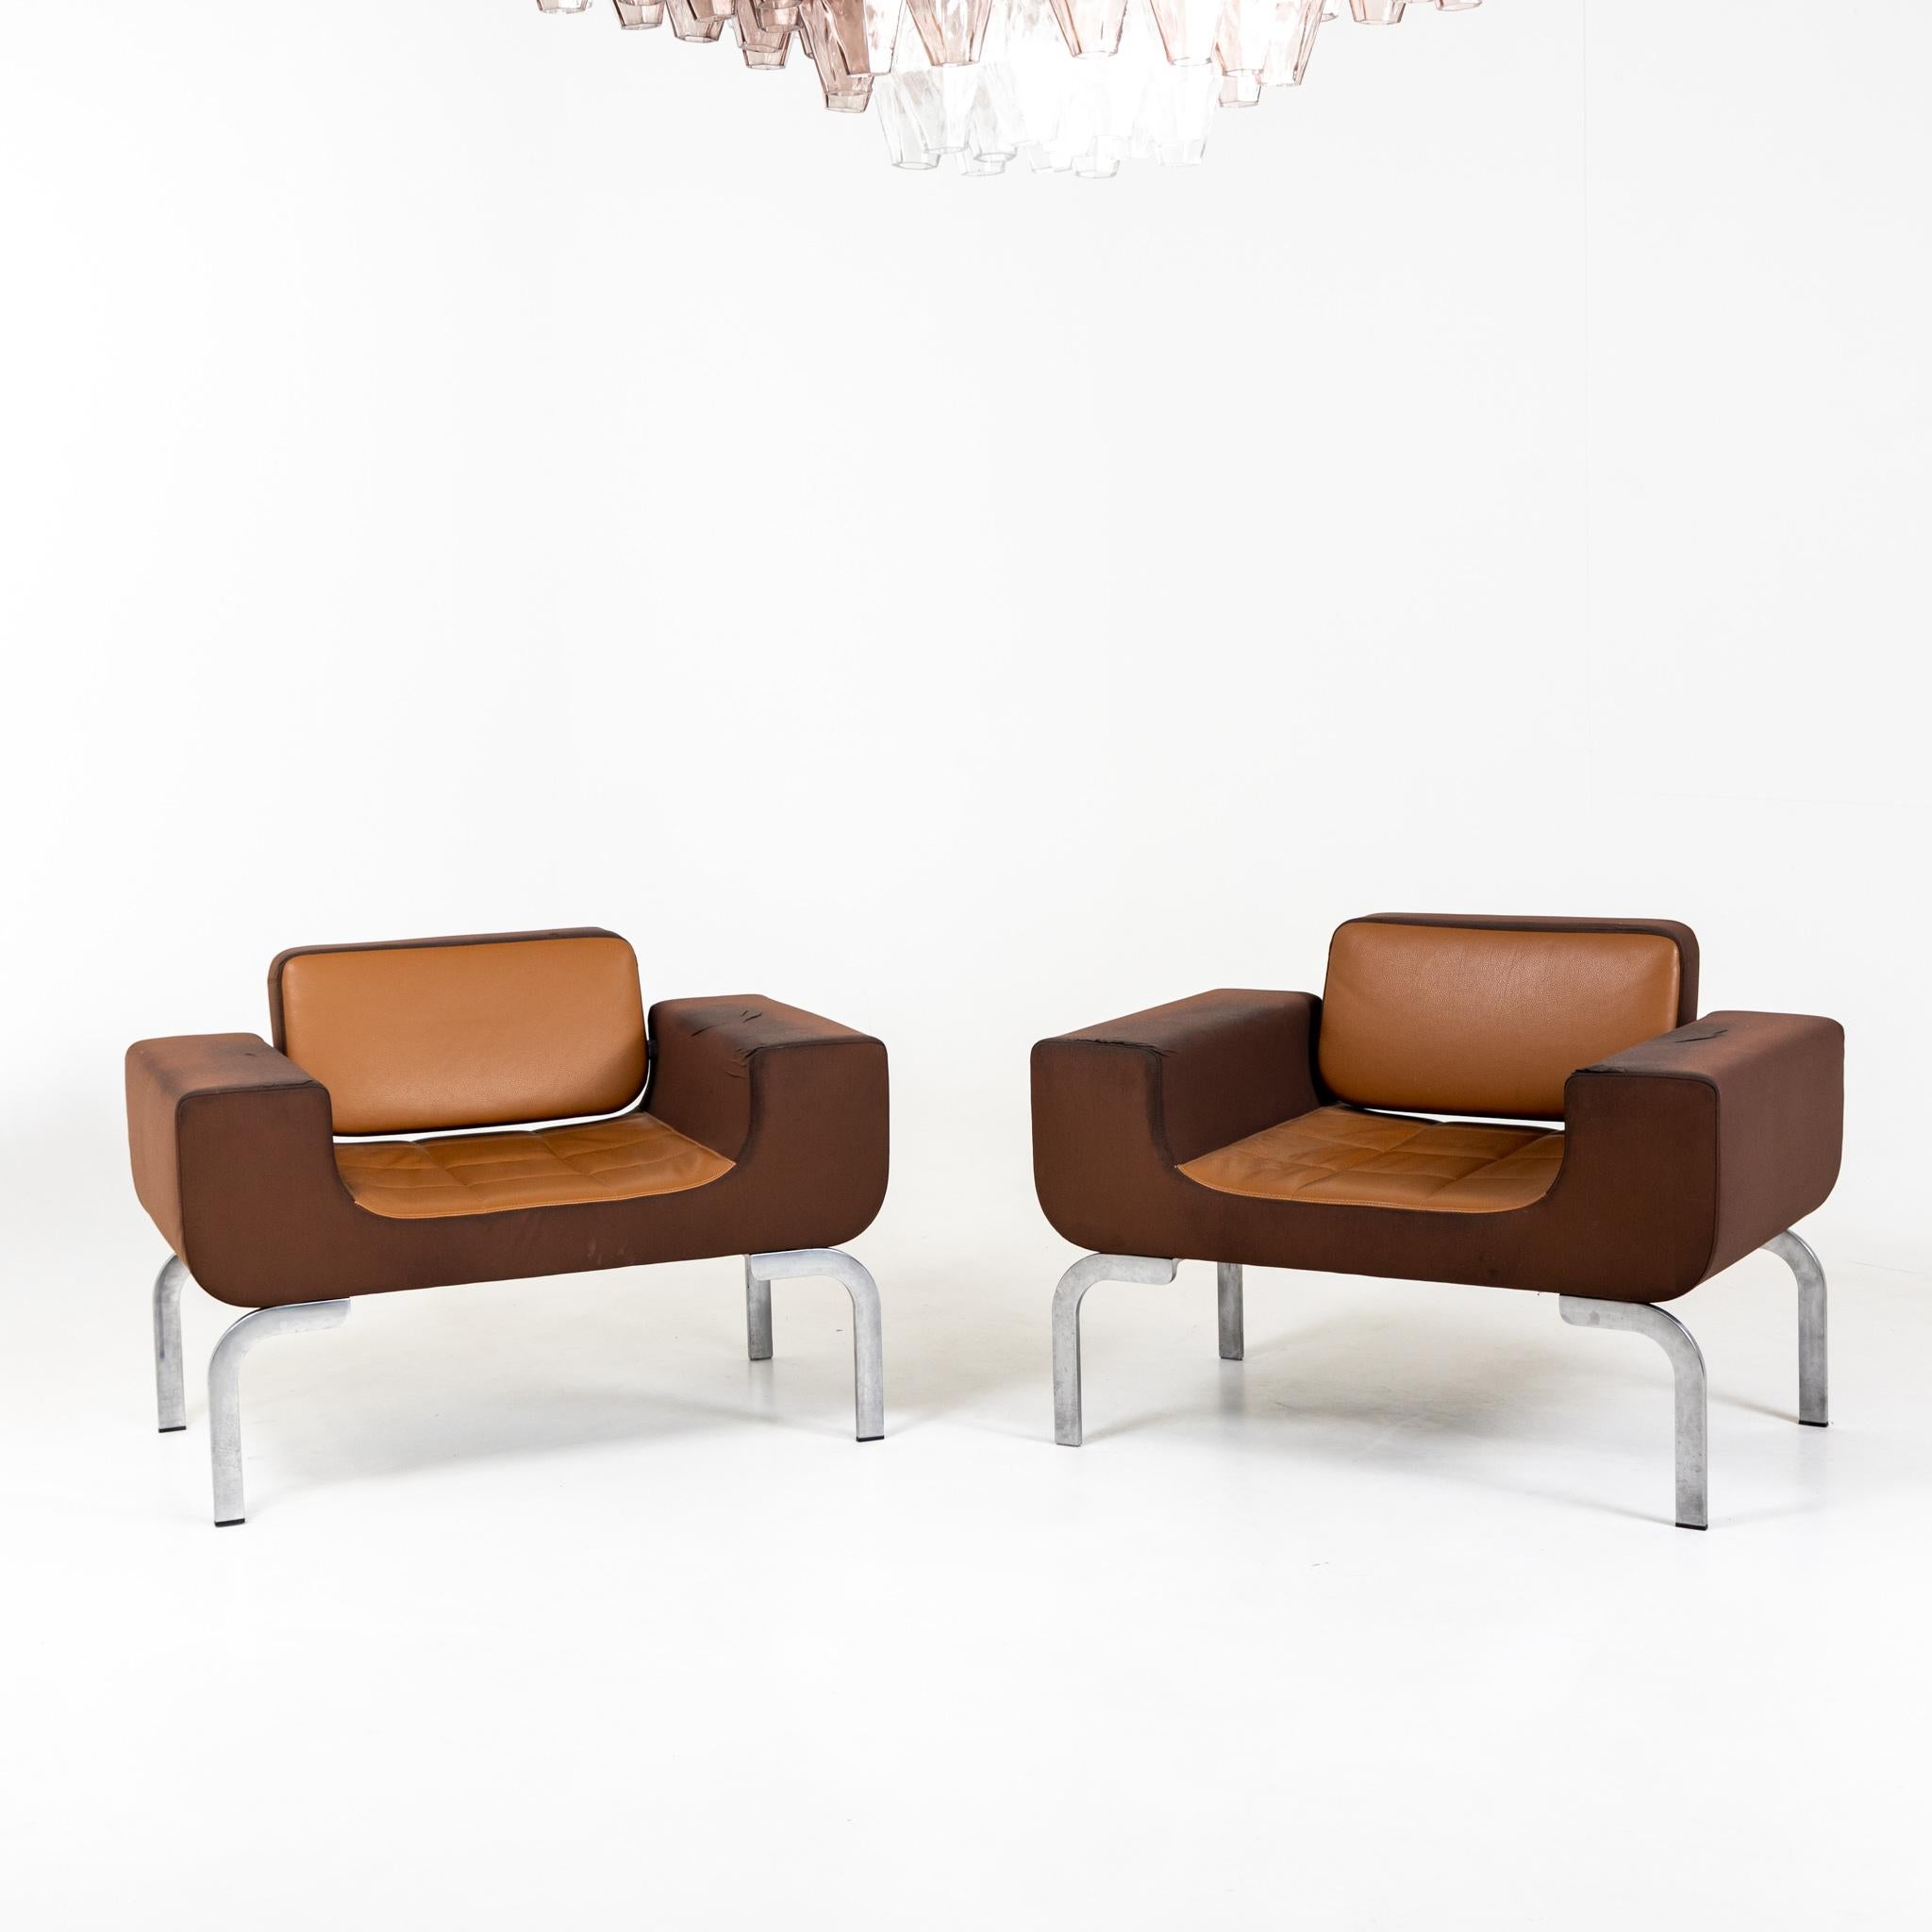 Pair of lounge chairs with brown leather upholstery in original condition.